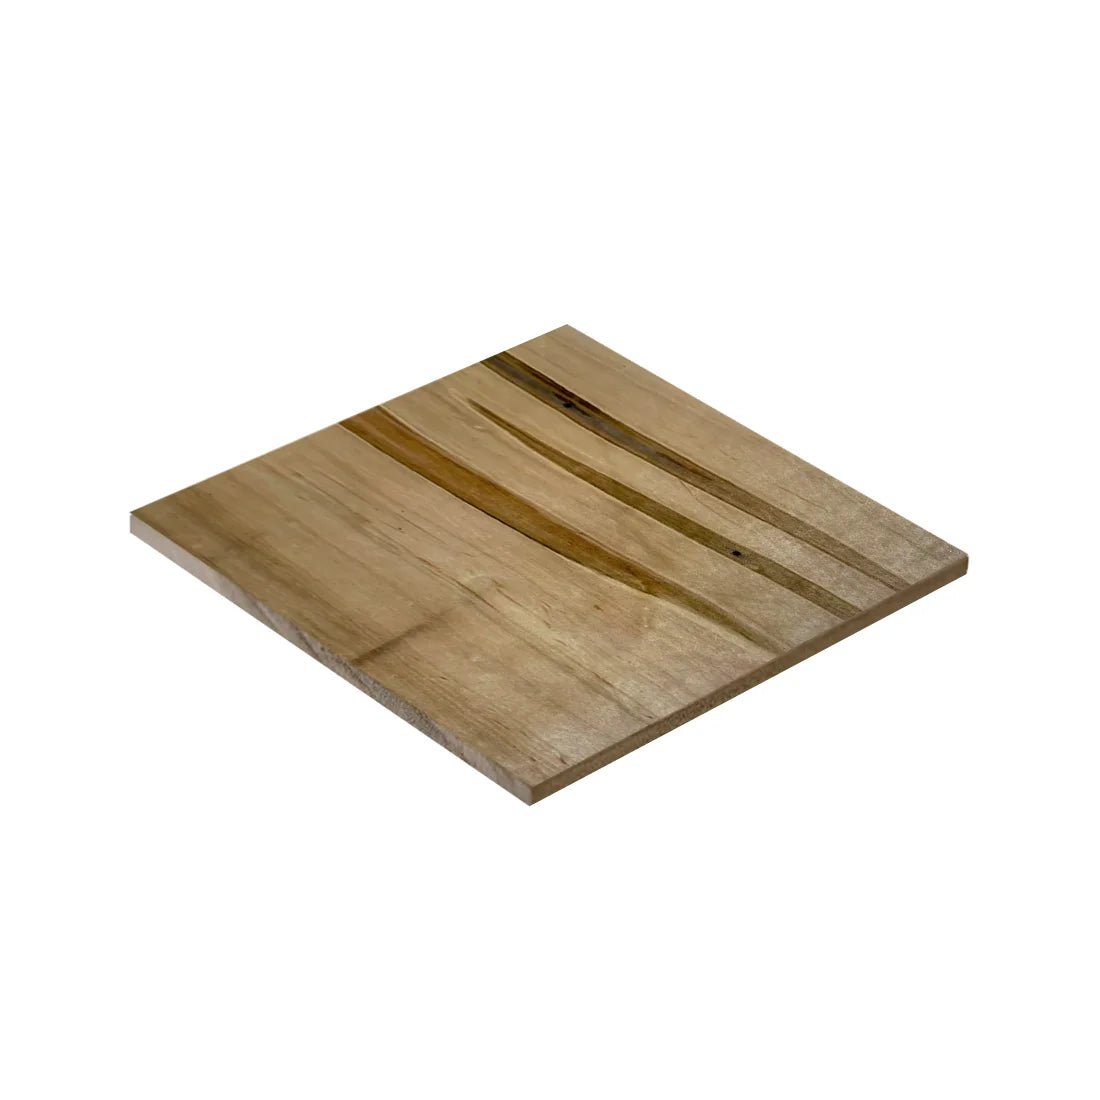 Ambrosia Maple Guitar Rosette Square blanks 6” x 6” x 3mm - Exotic Wood Zone - Buy online Across USA 